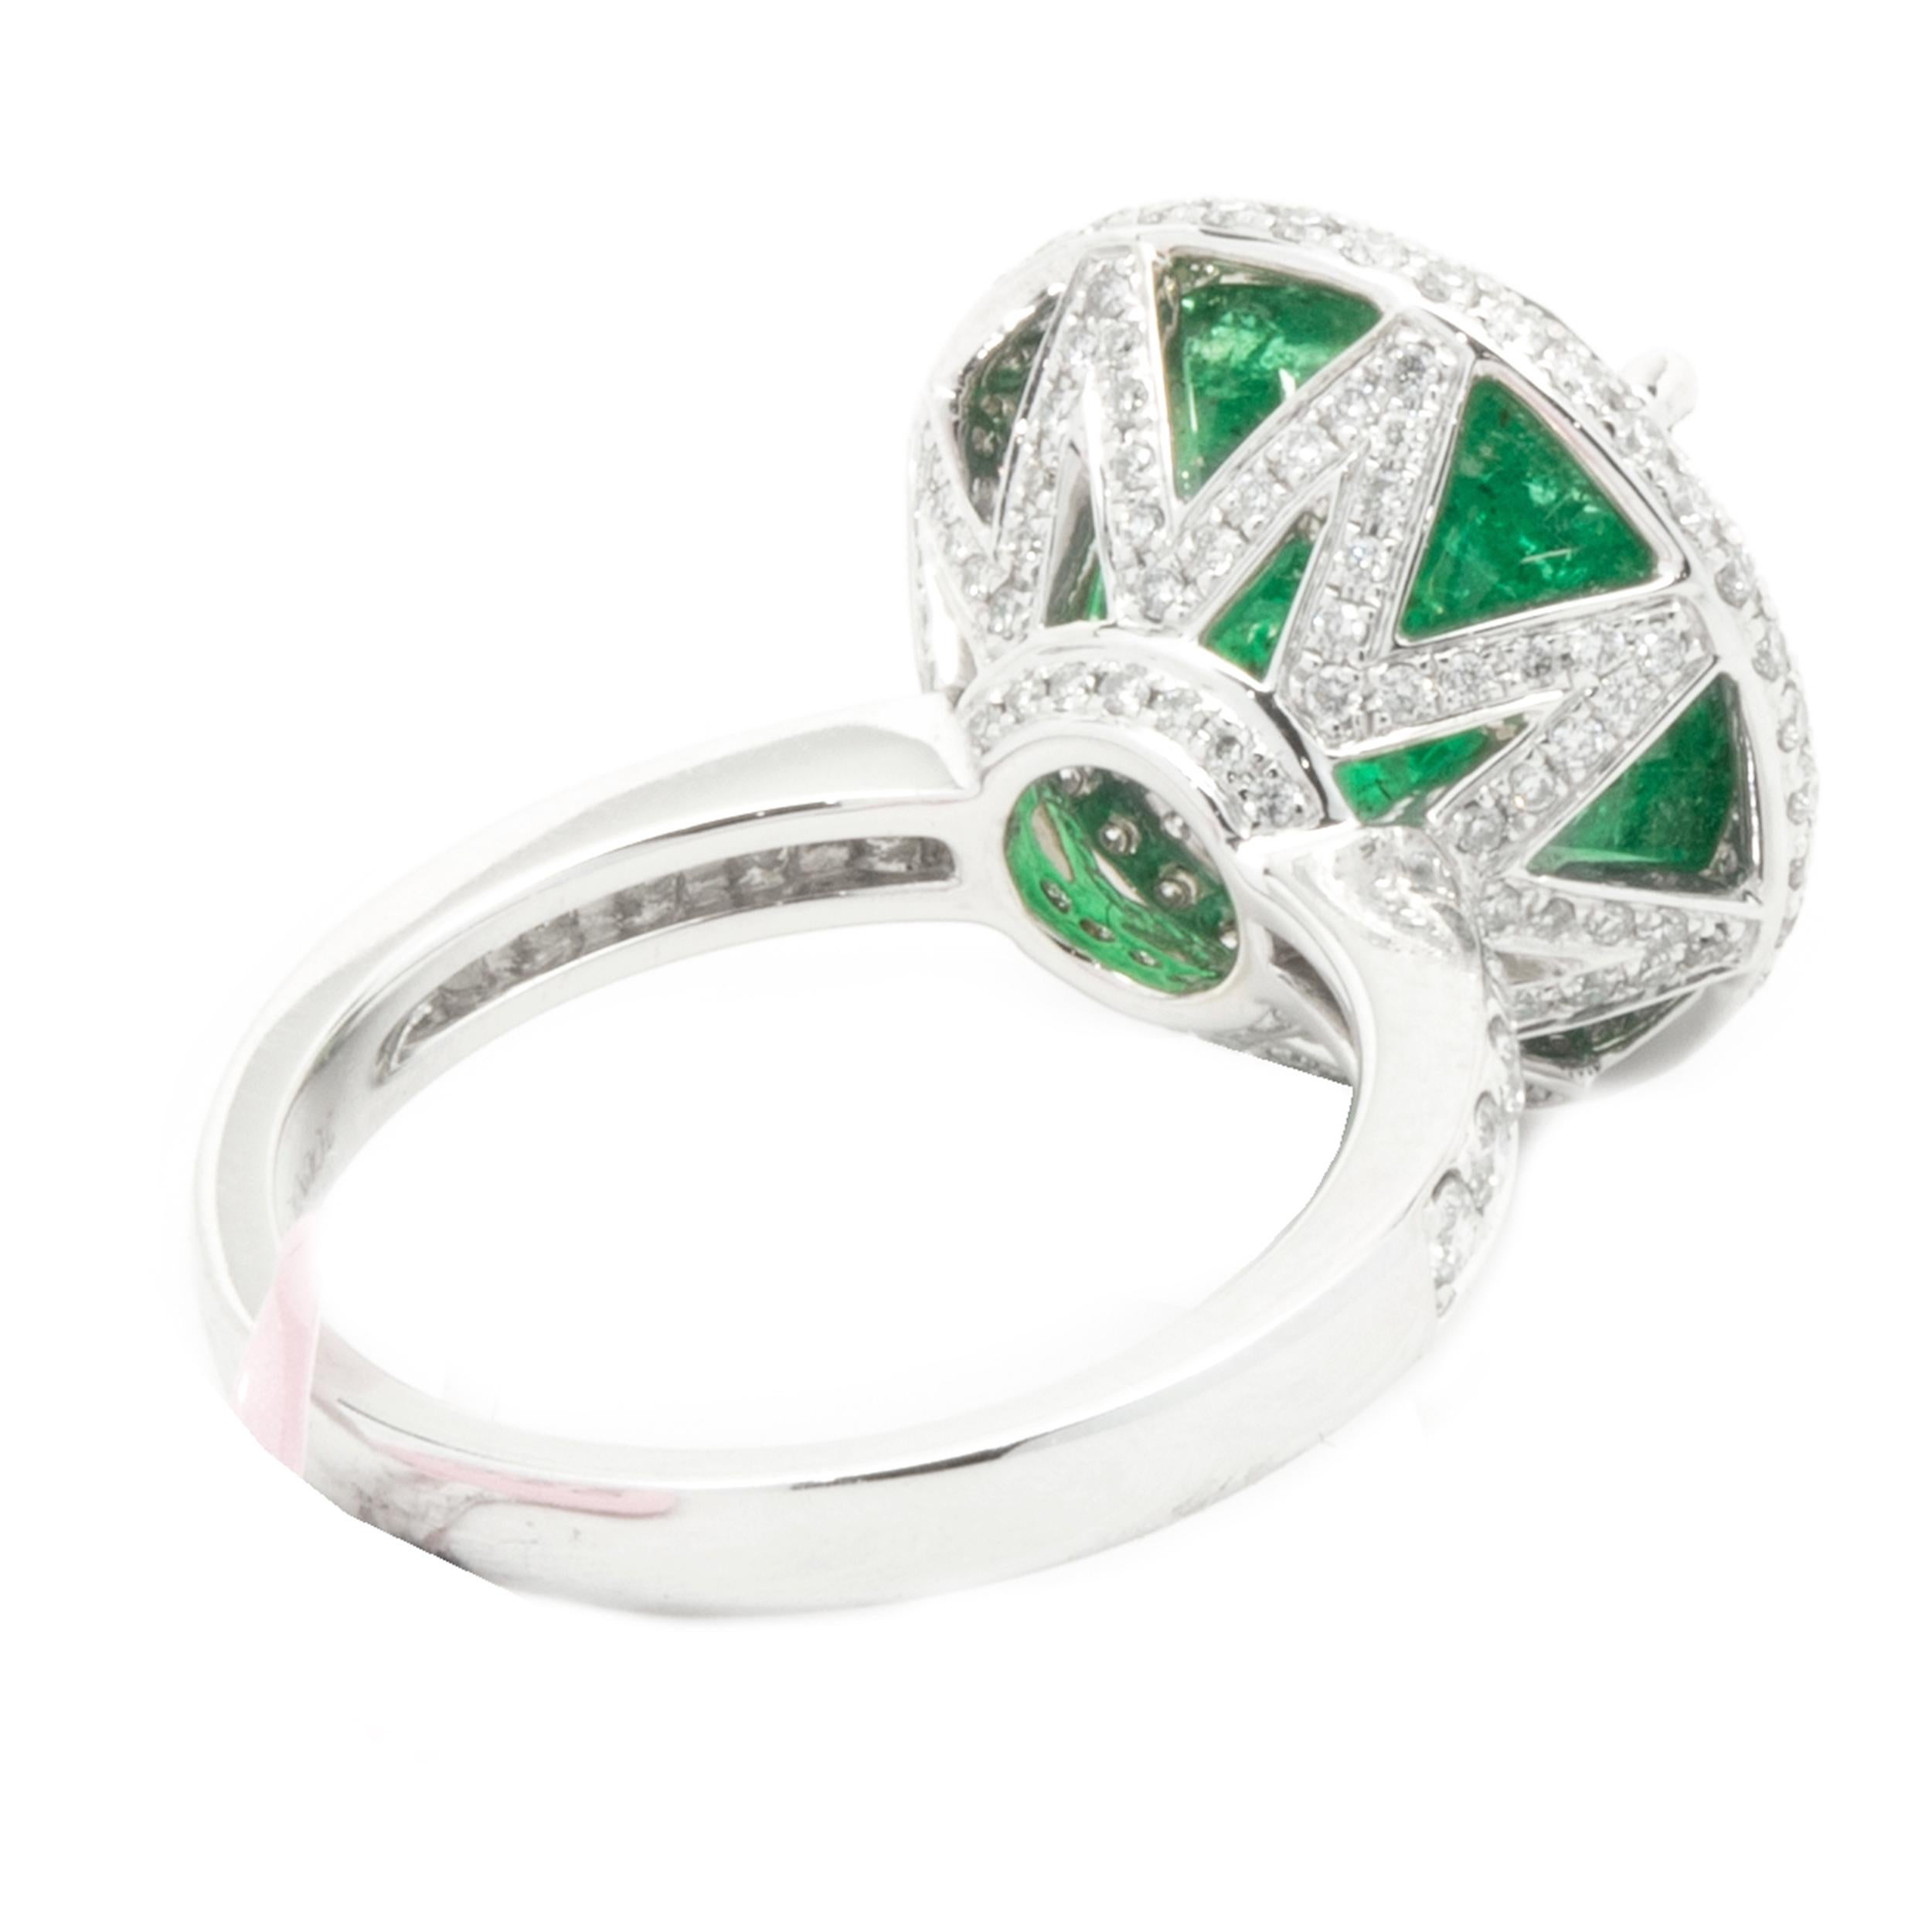 18 Karat White Gold Emerald and Diamond Cocktail Ring In Excellent Condition For Sale In Scottsdale, AZ